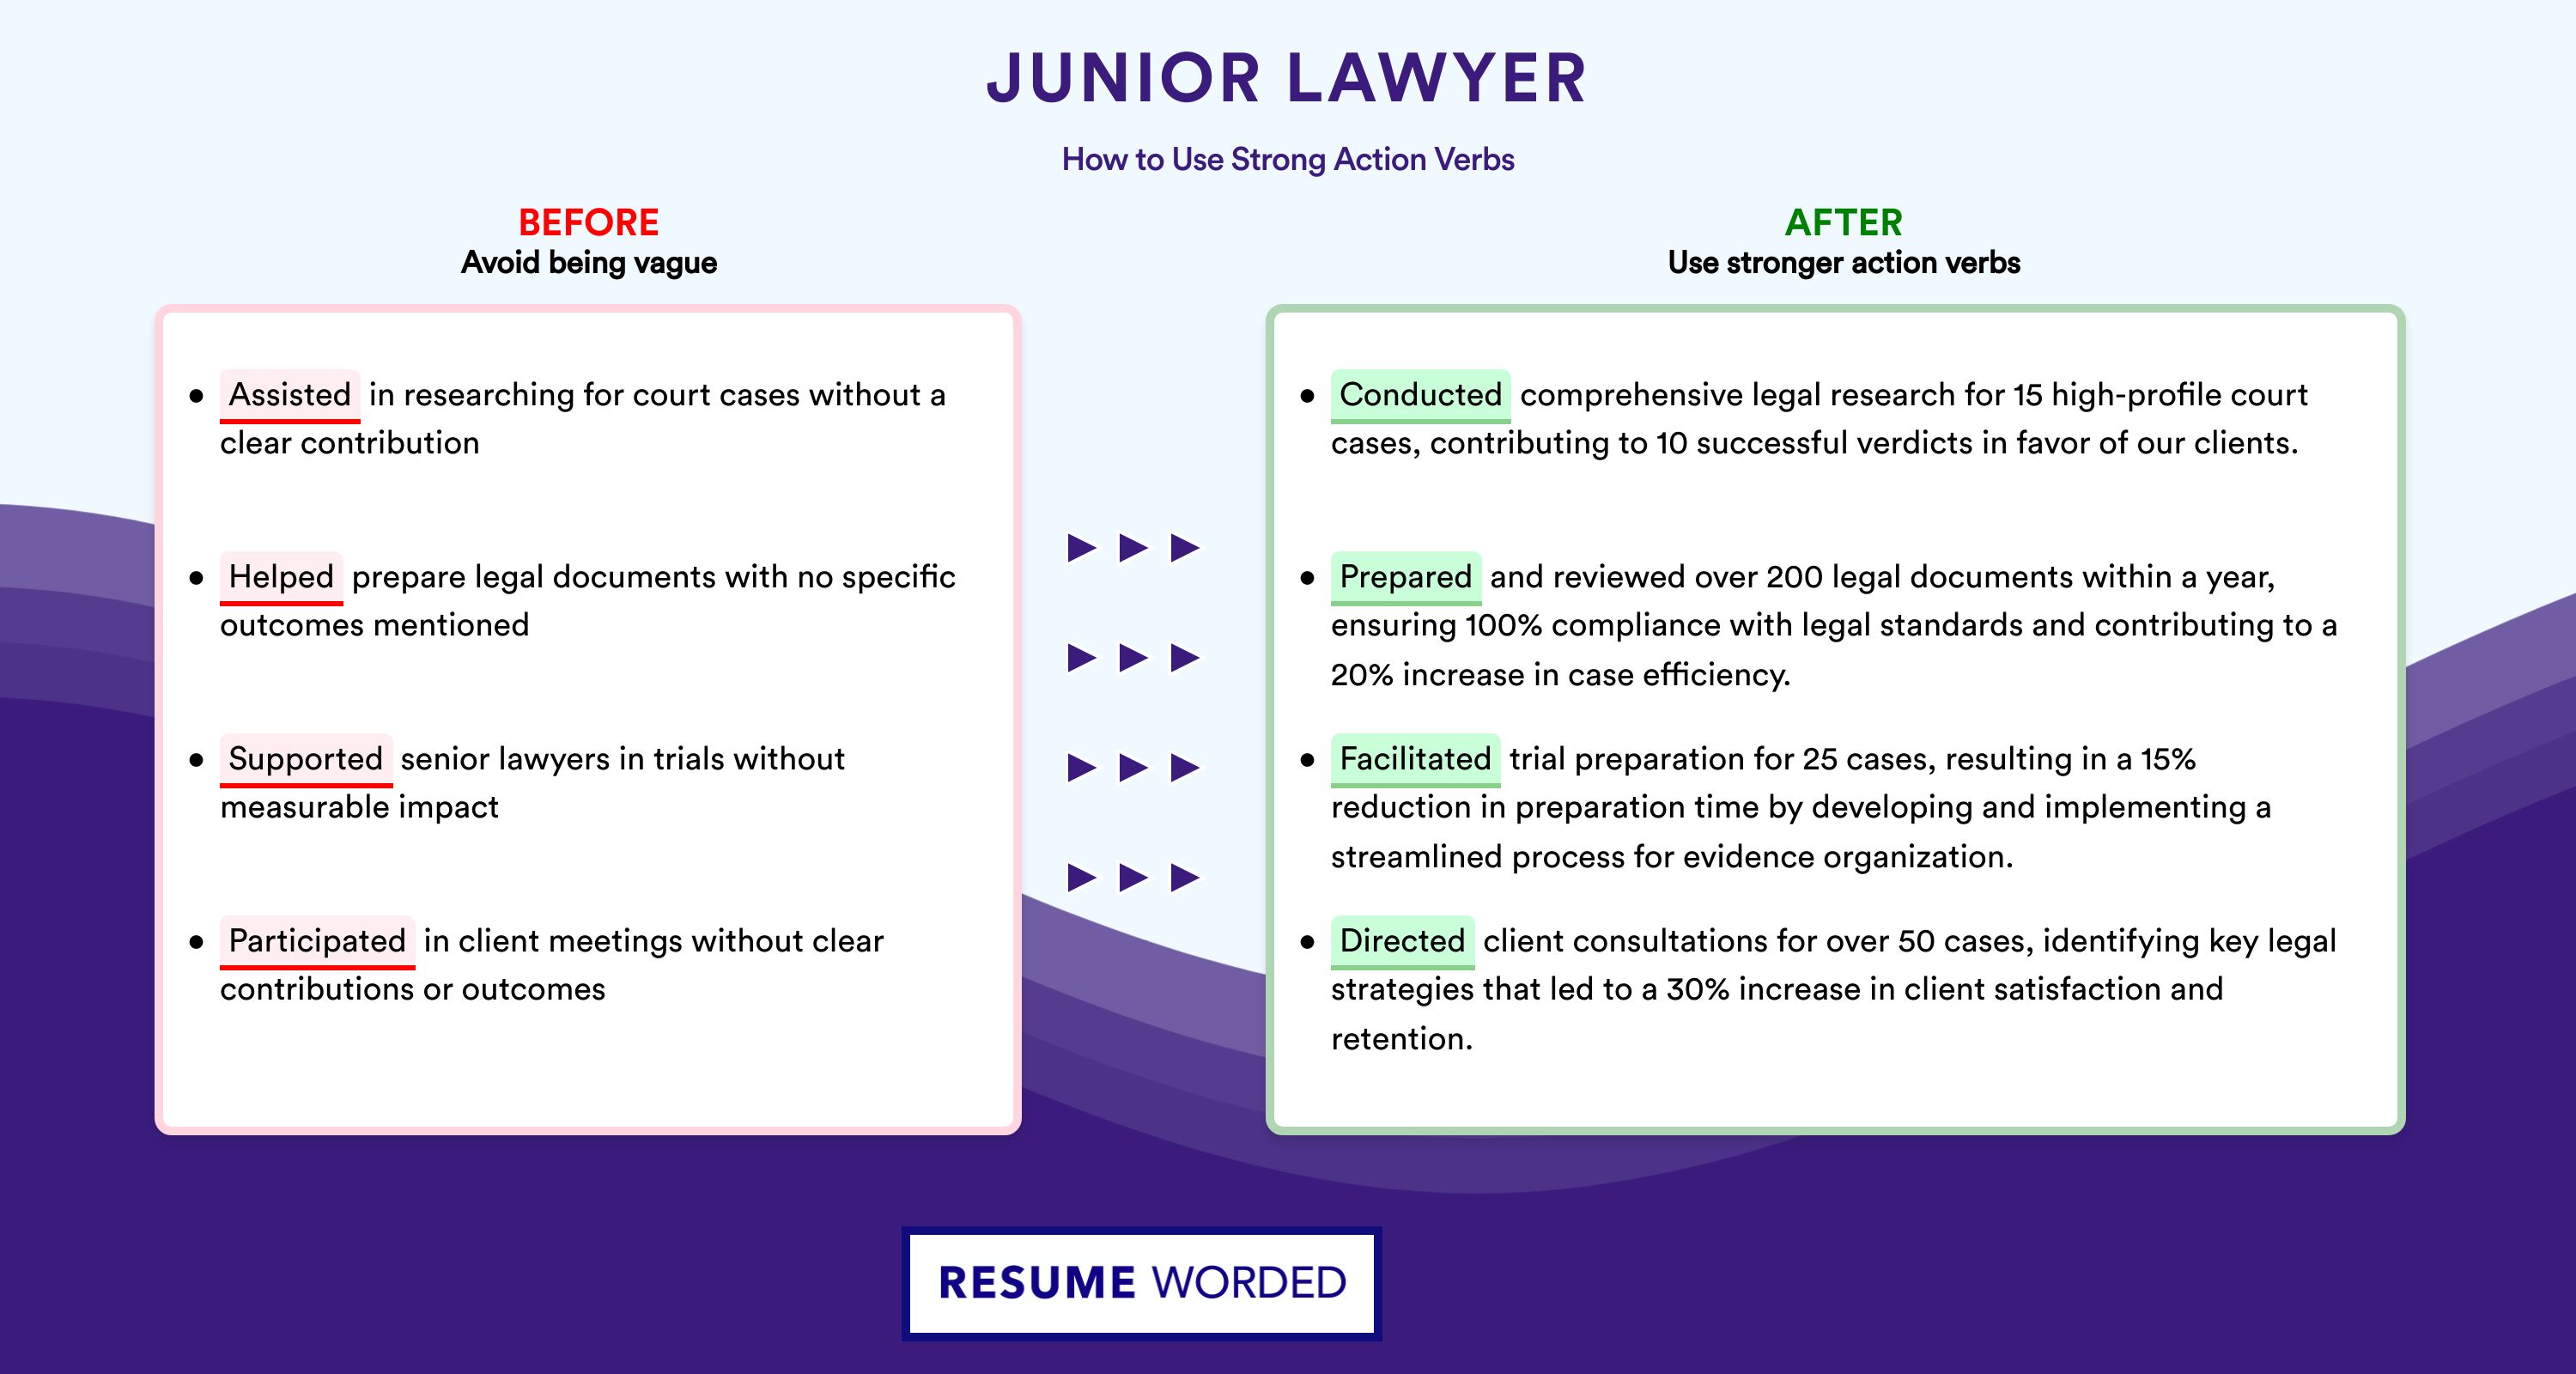 Action Verbs for Junior Lawyer